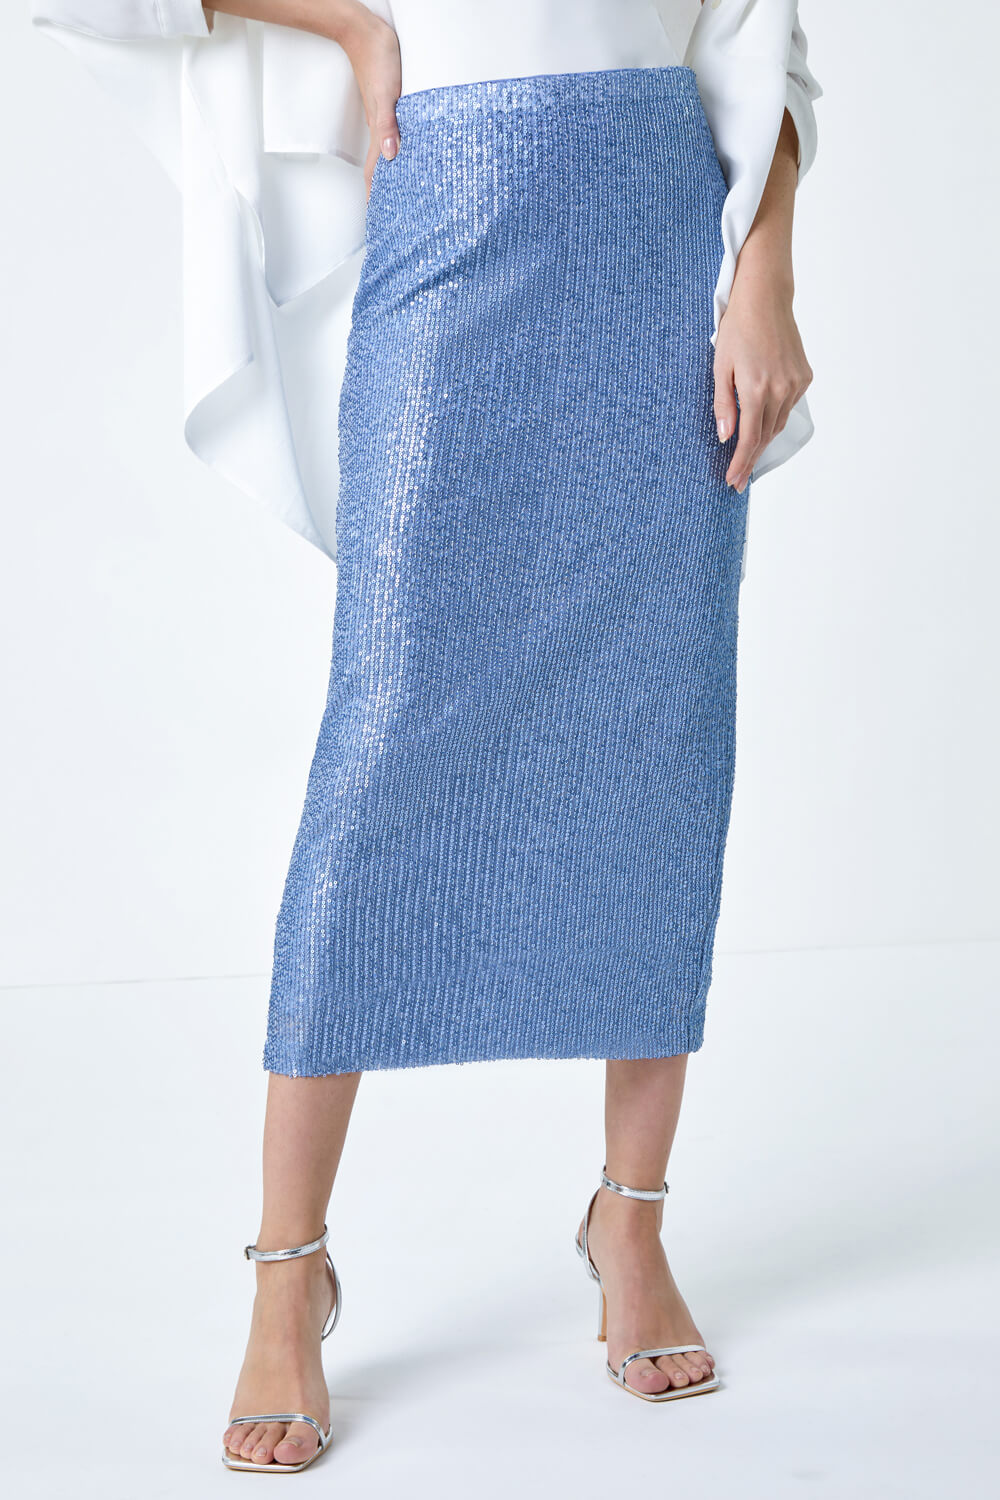 Steel Blue Sequin Sparkle Stretch Midi Skirt, Image 4 of 5